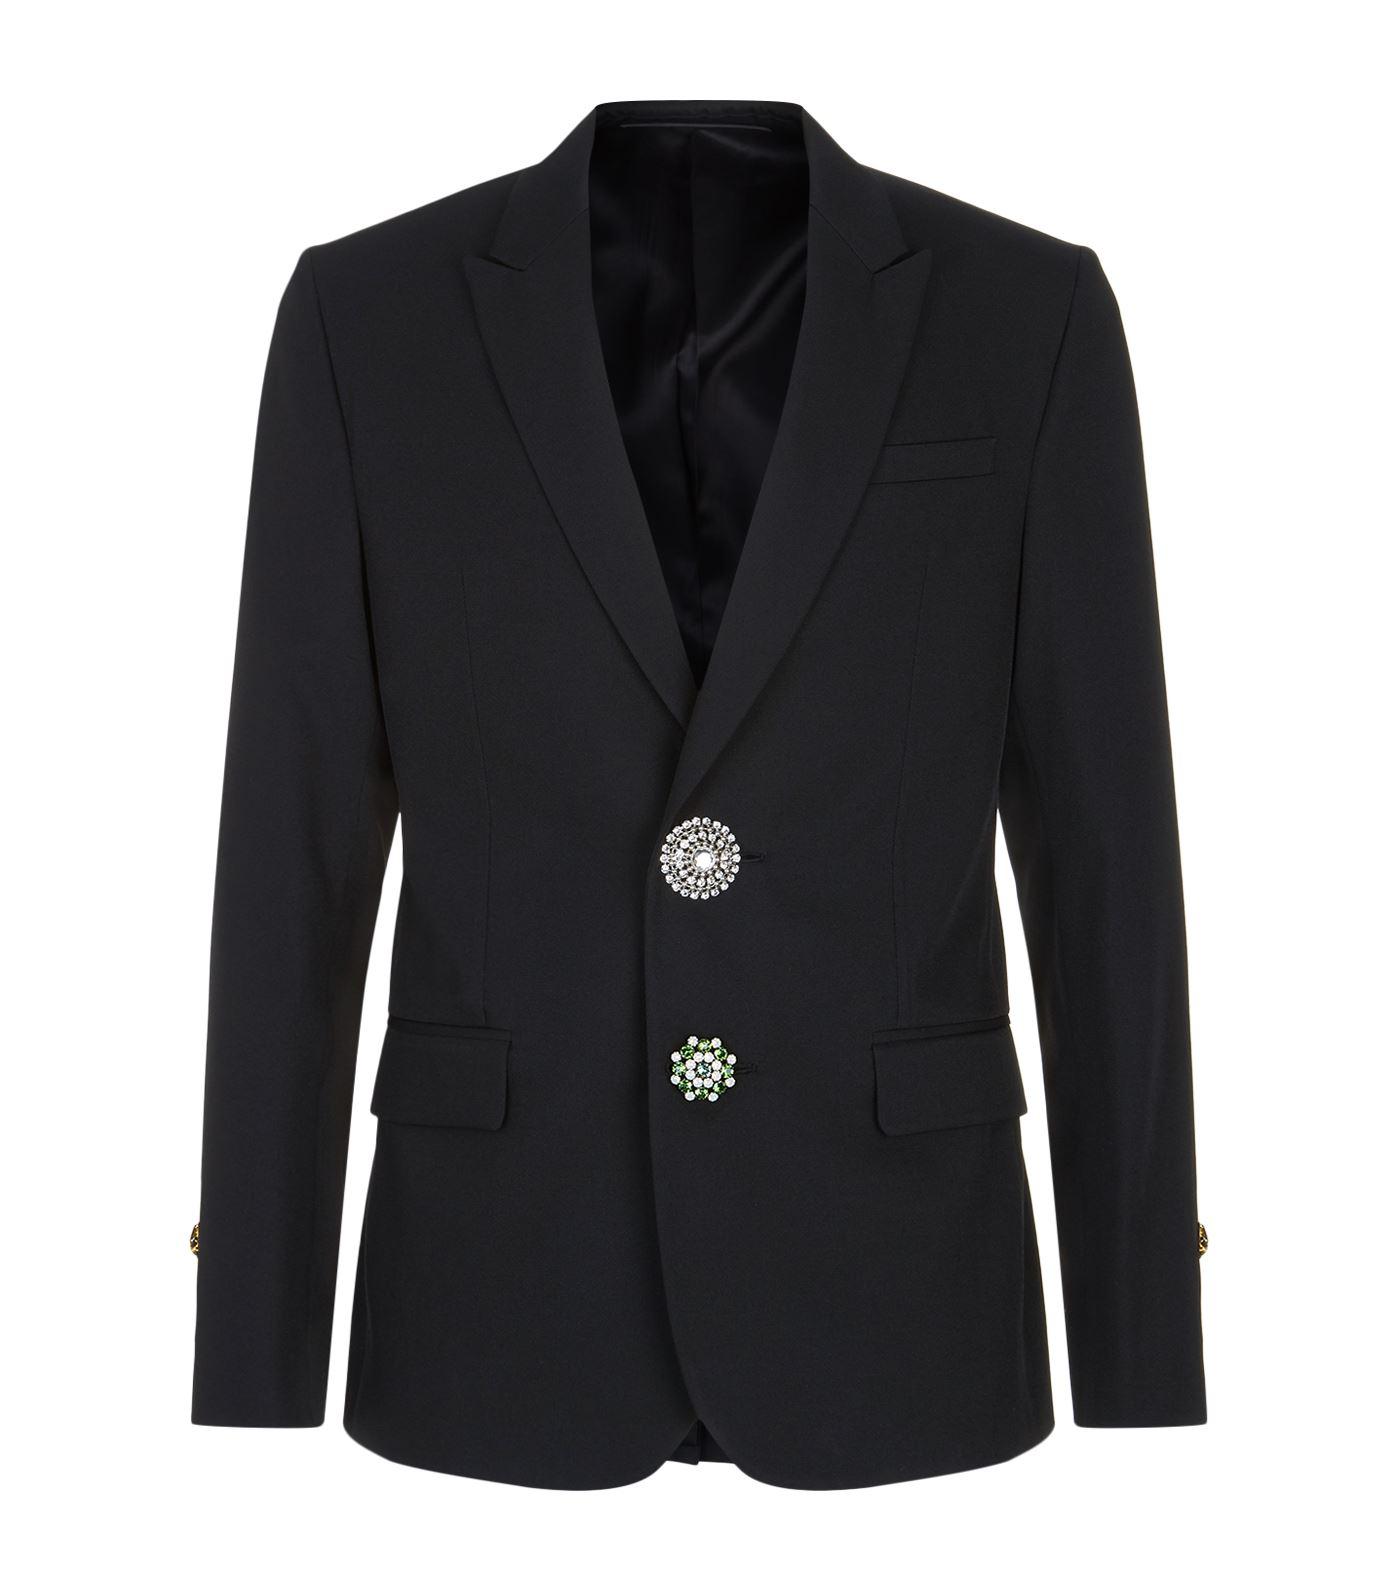 Givenchy Synthetic Brooch Button Blazer in Black for Men - Lyst